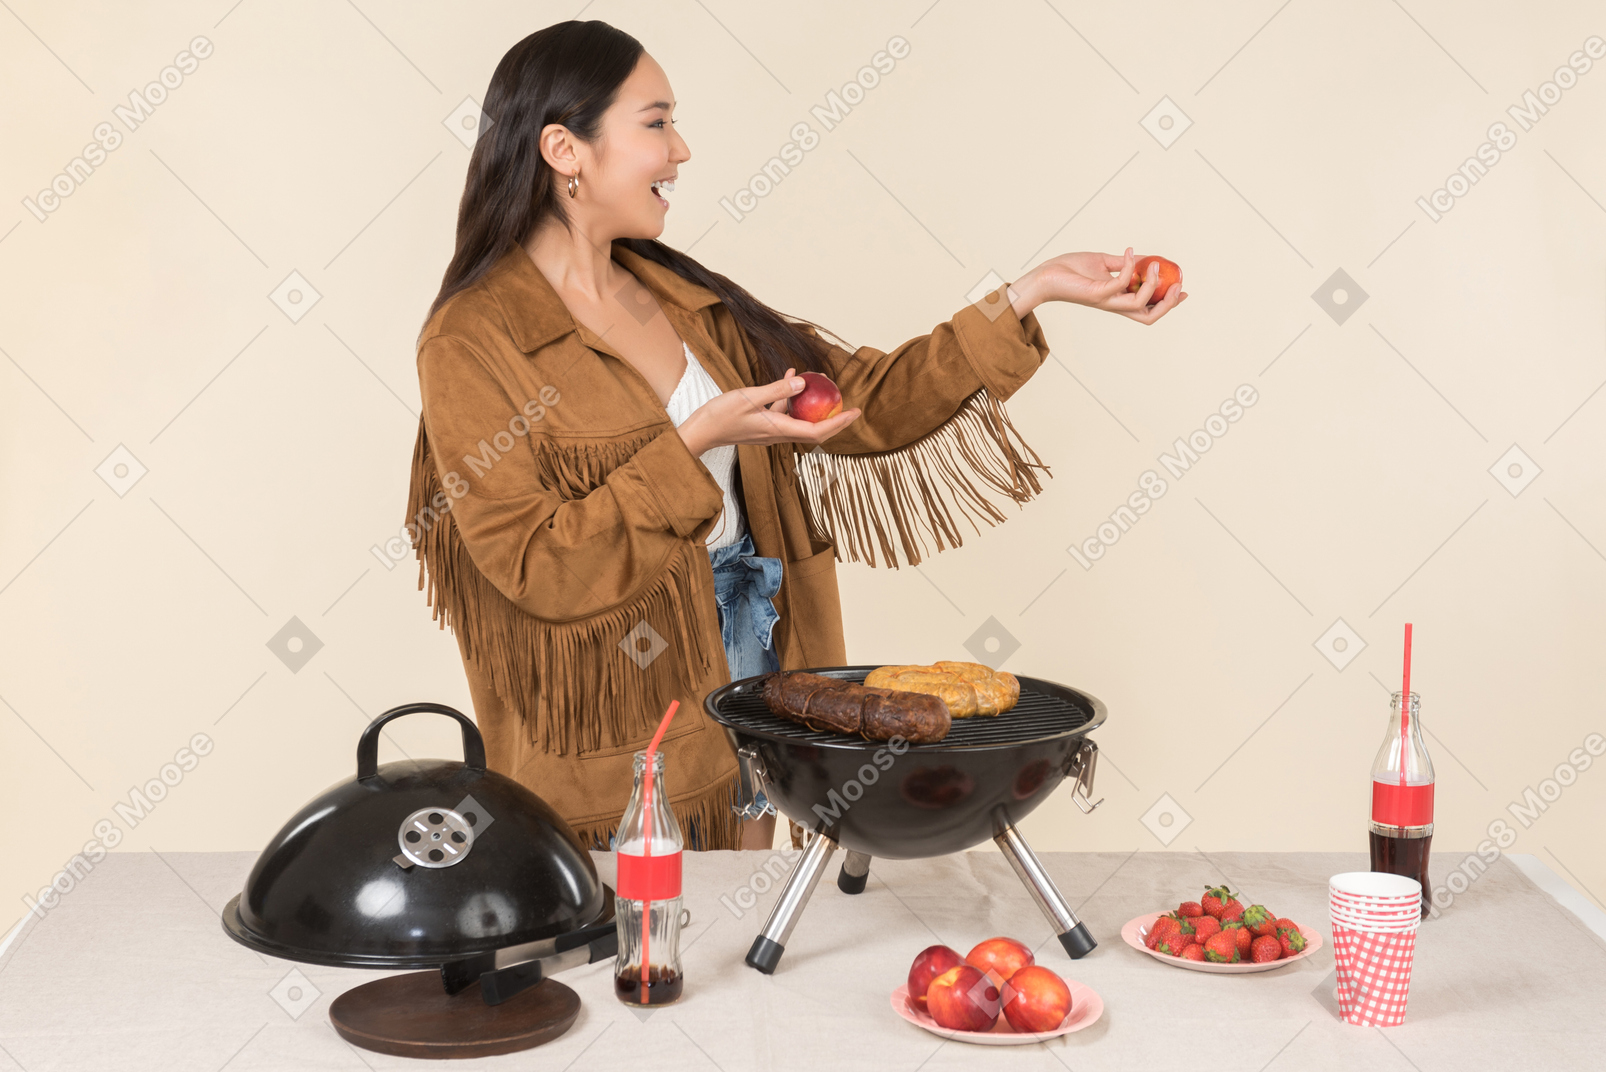 Young asian woman holding fruits and standing near grill